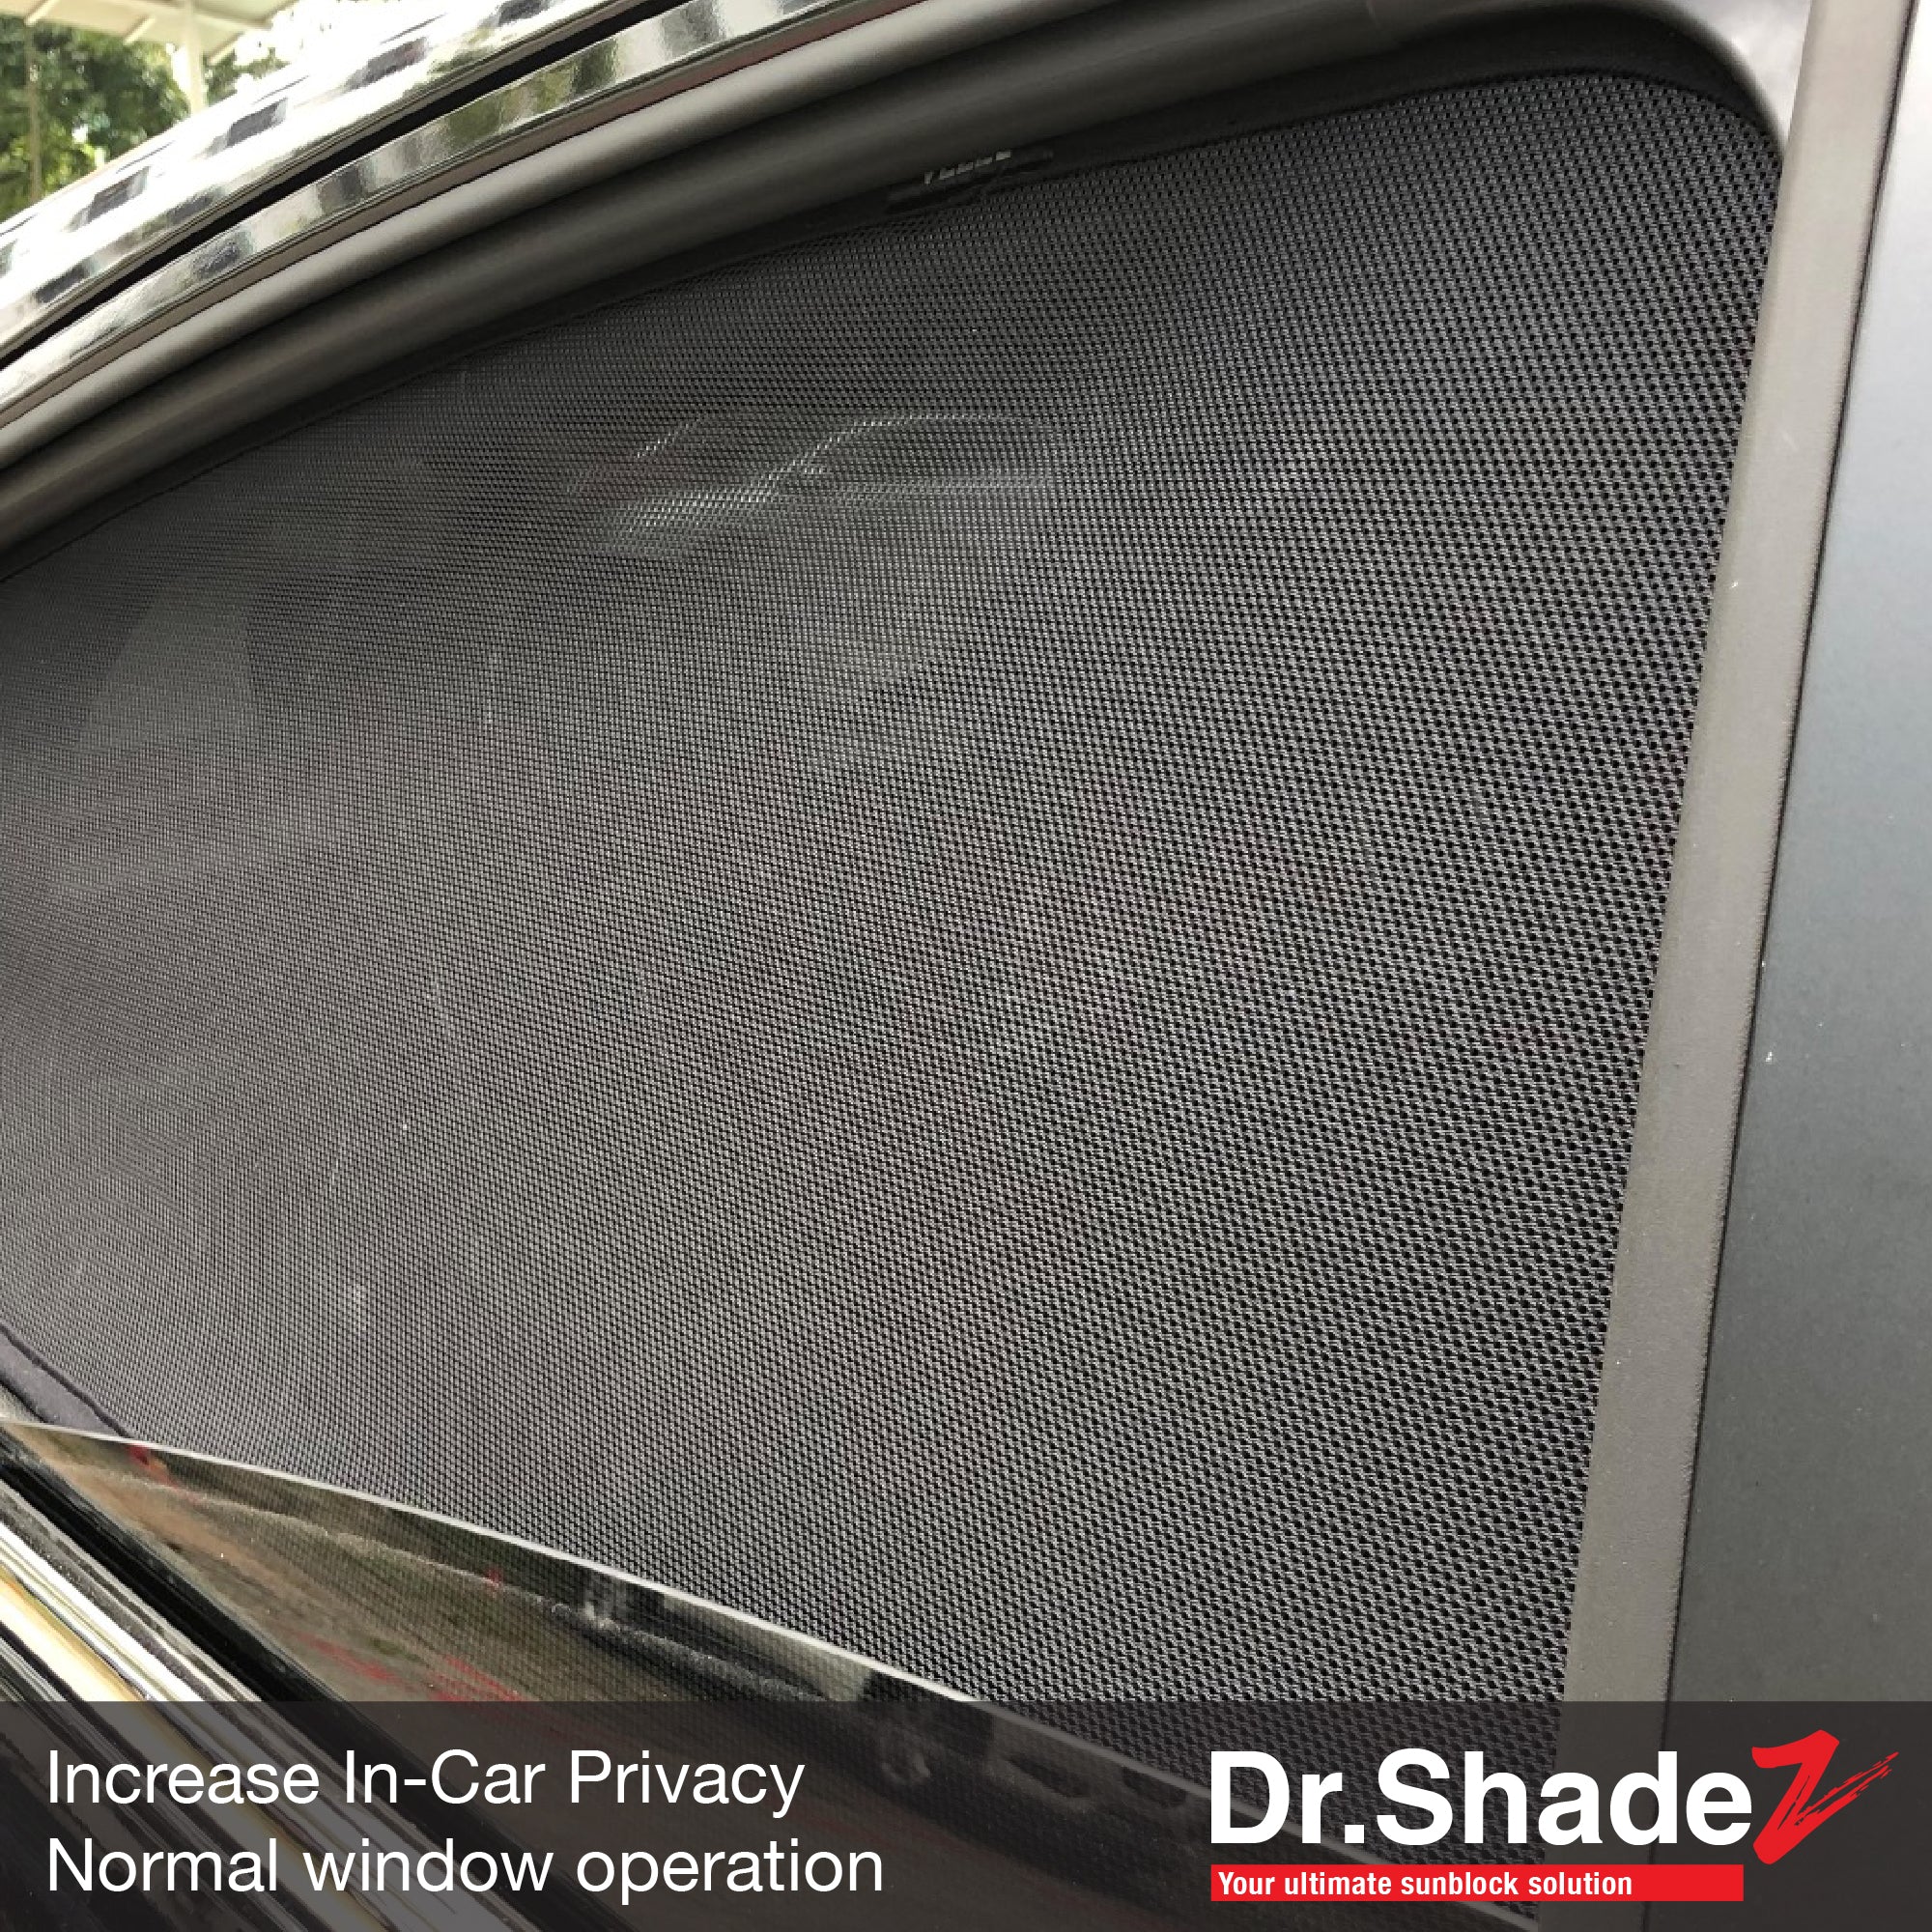 Porsche Cayenne 2011-2014 2nd Generation (92A E2) PRE-FACELIFT Germany Luxury Mid Size Compact Crossover Customised Car Window Magnetic Sunshades